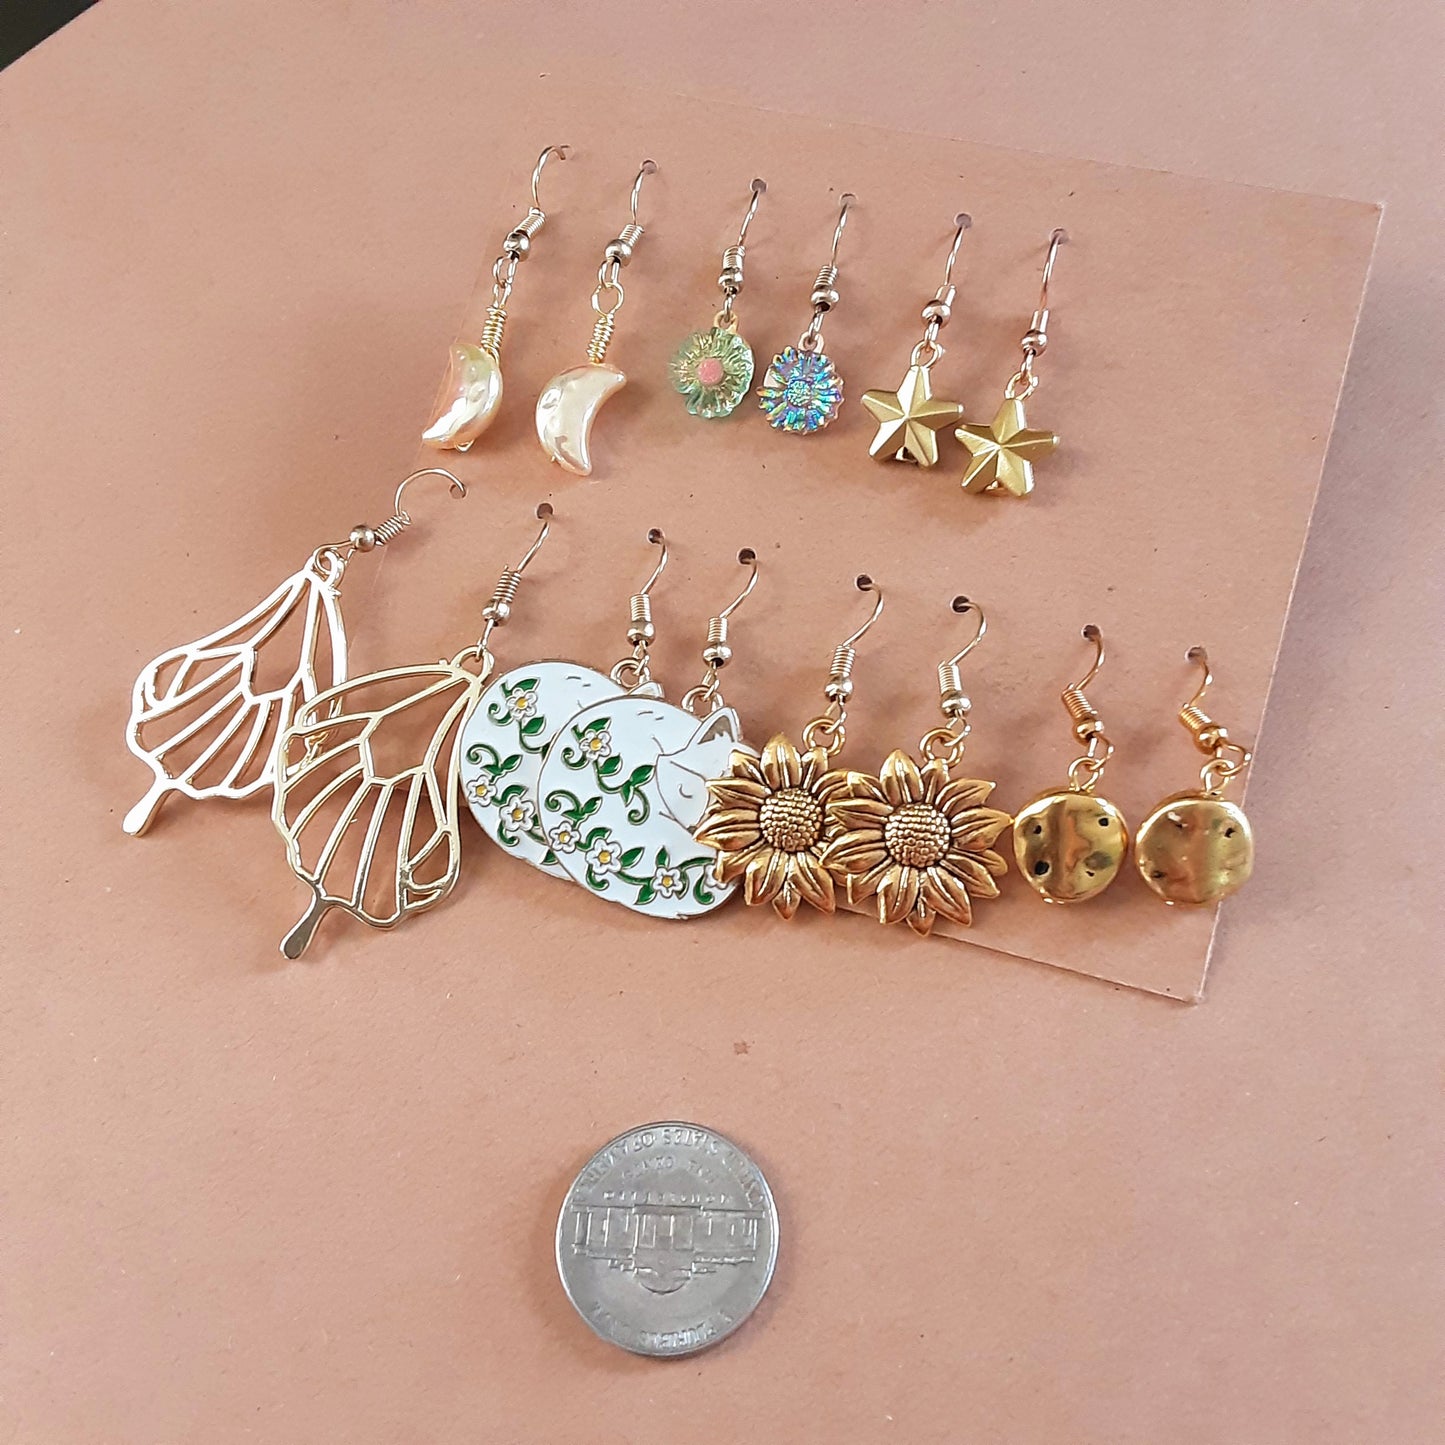 7 pairs of earrings Cute Cottagecore vibes